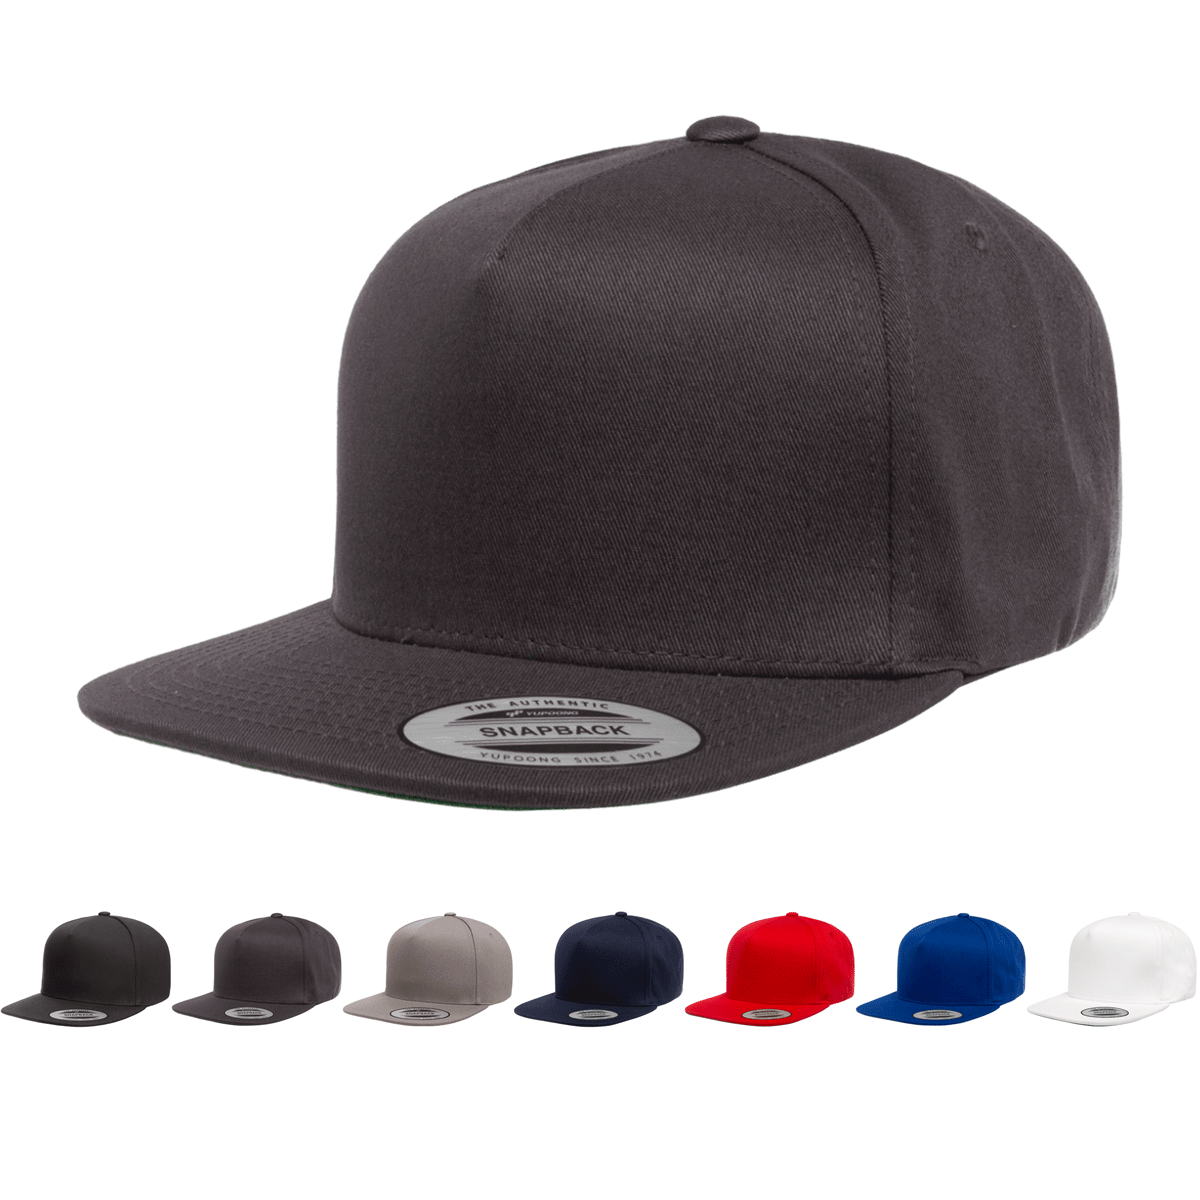 Yupoong 6007 Snapback Wholesale Bill YP 5-Panel - Twill Cotton Flat – Hat, Cla Cap Park The